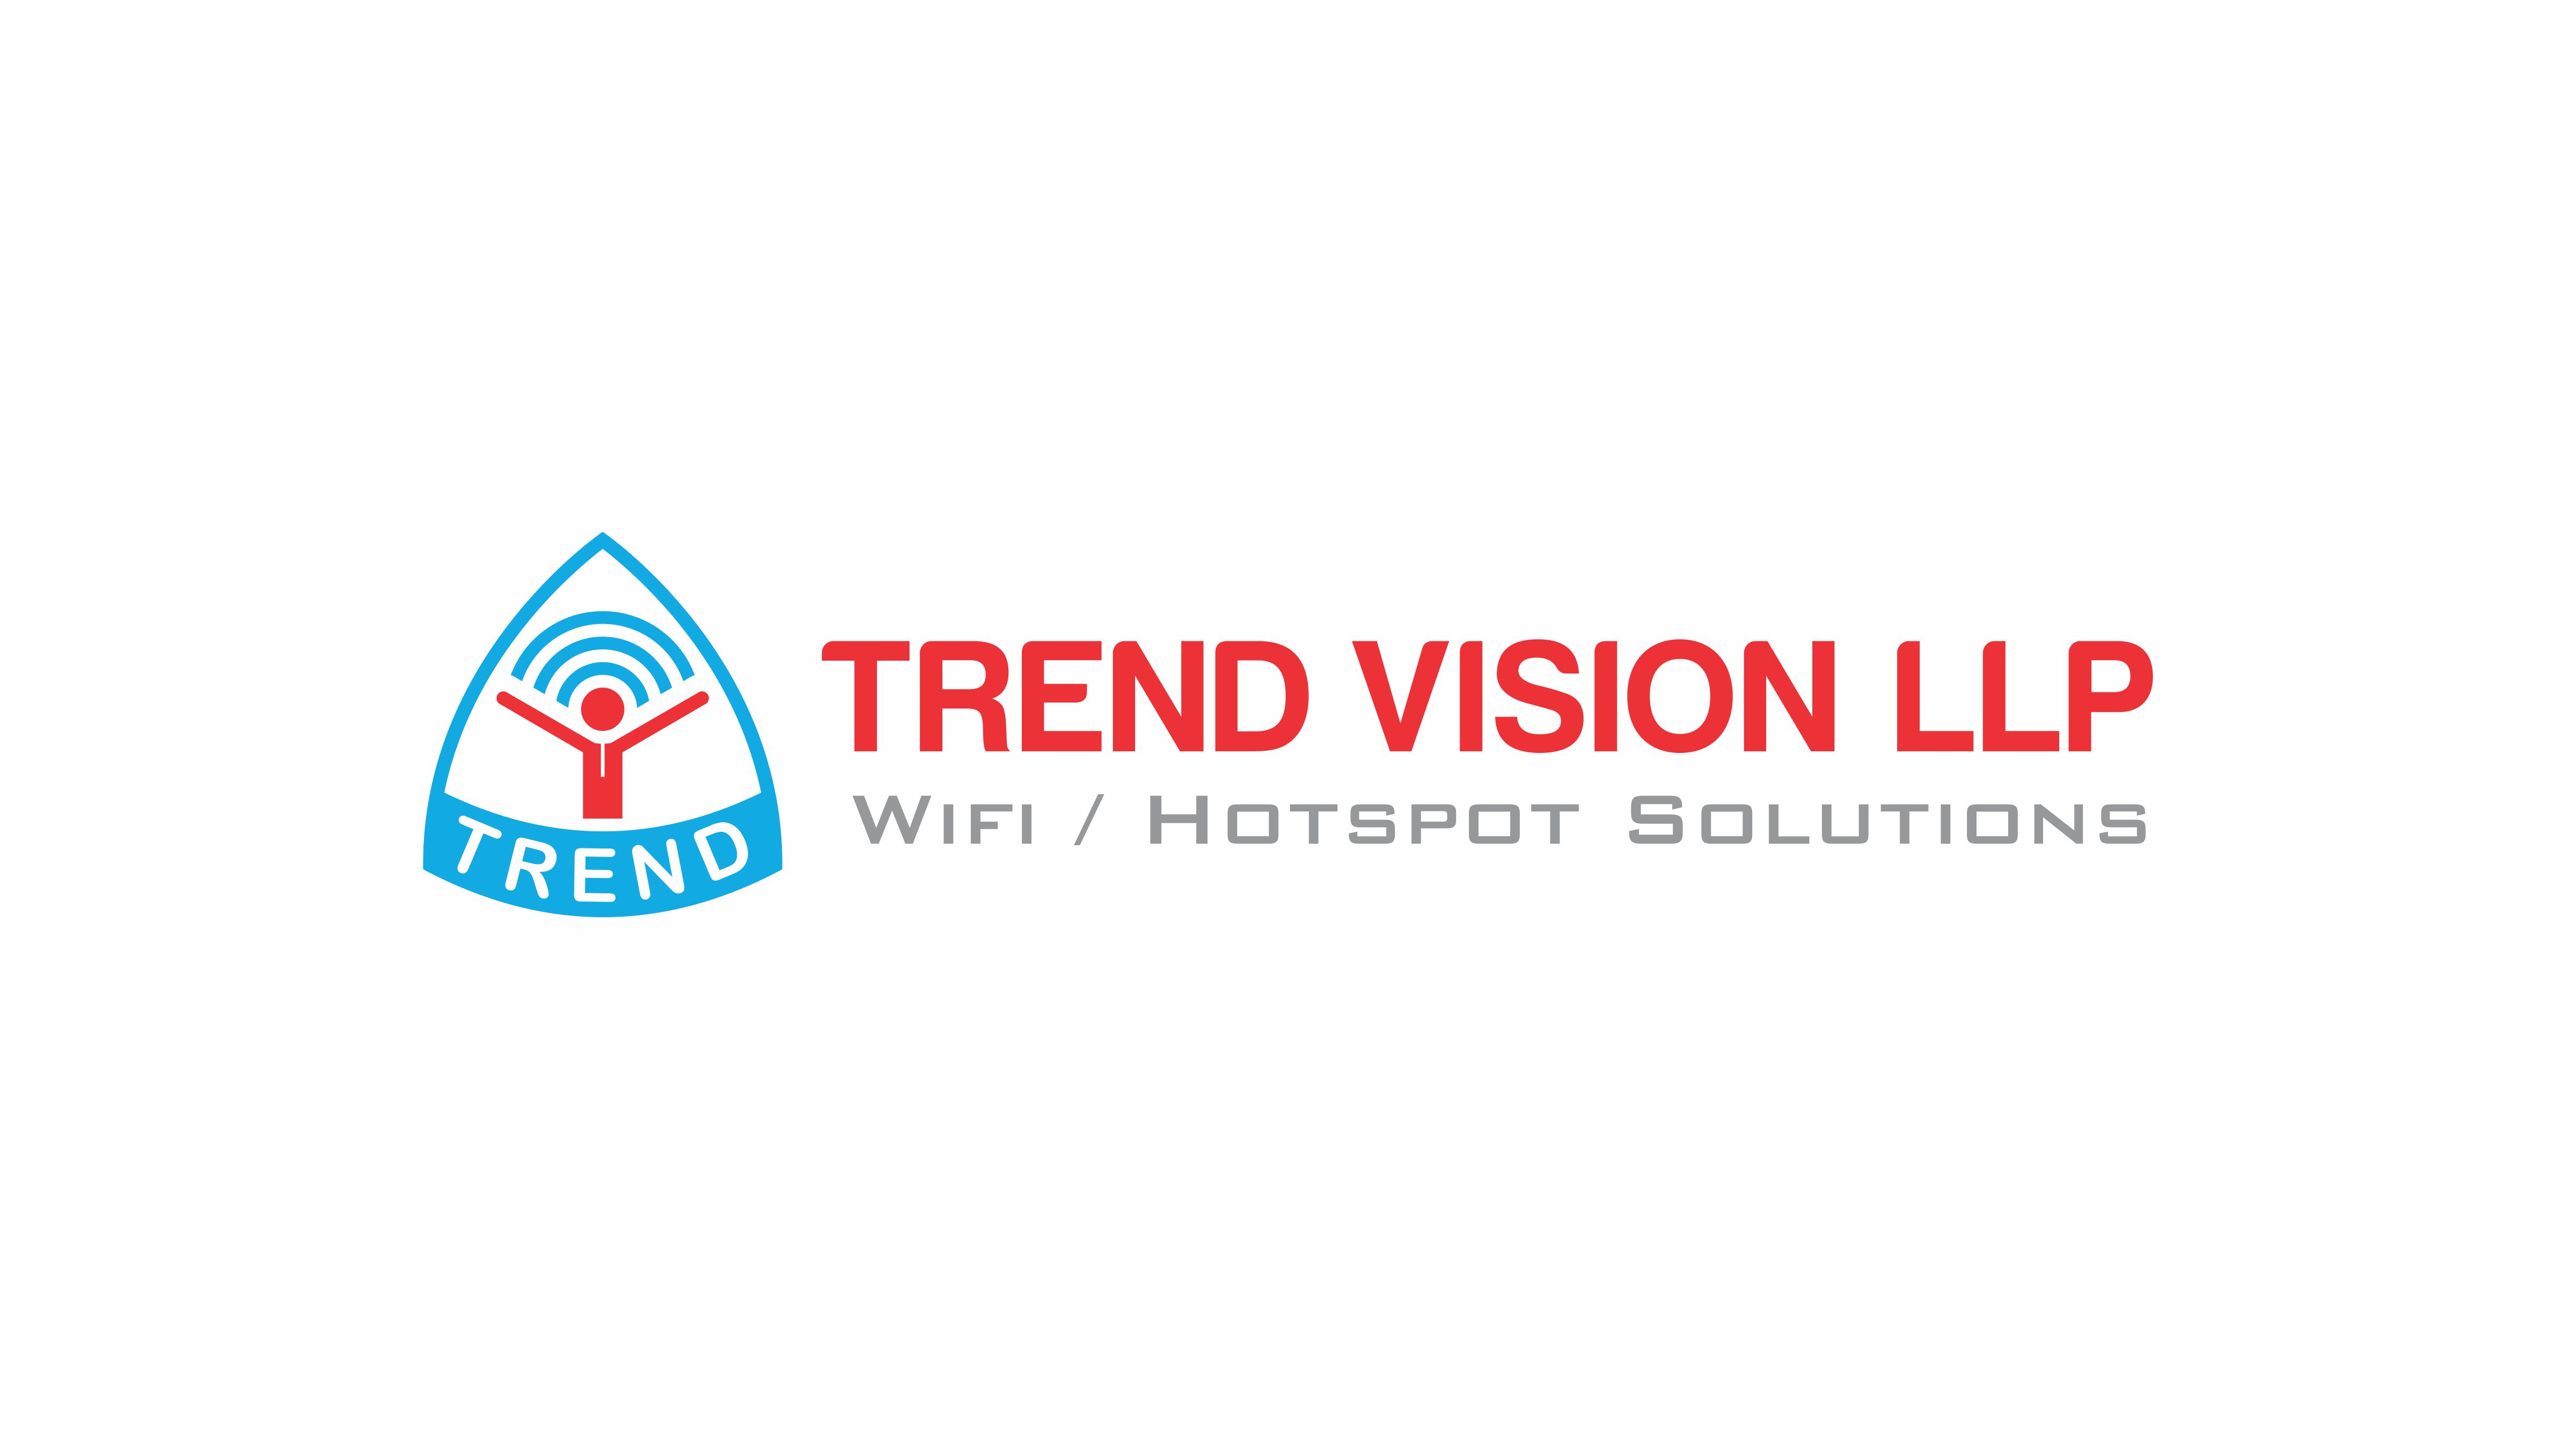 Trend Vision LLP